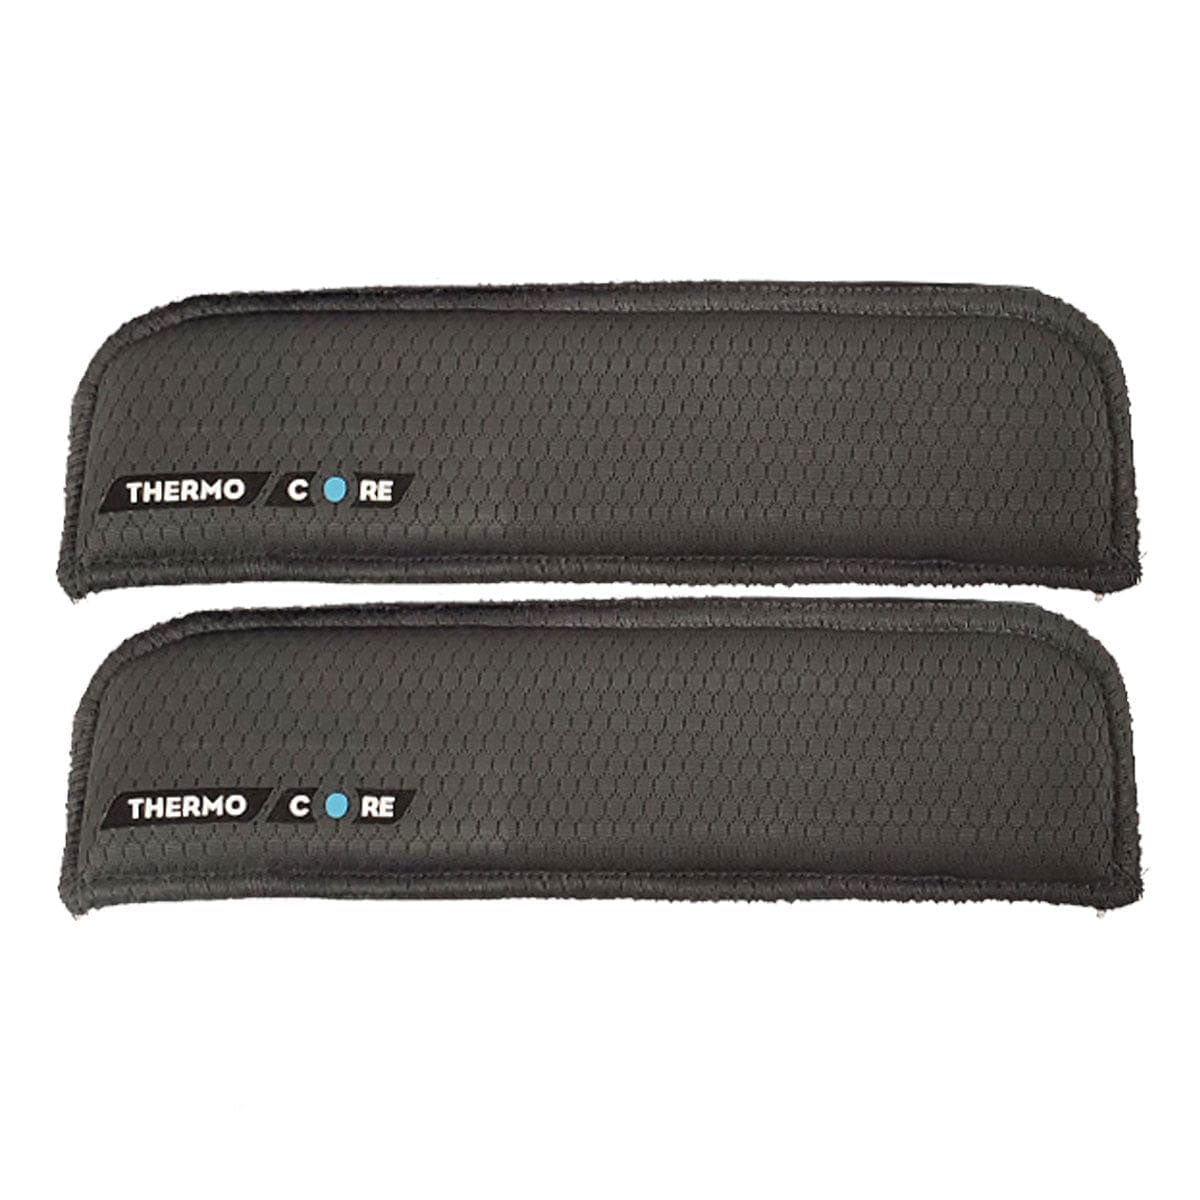 Bauer Thermocore Goalie Sweat Band (2 Pack)